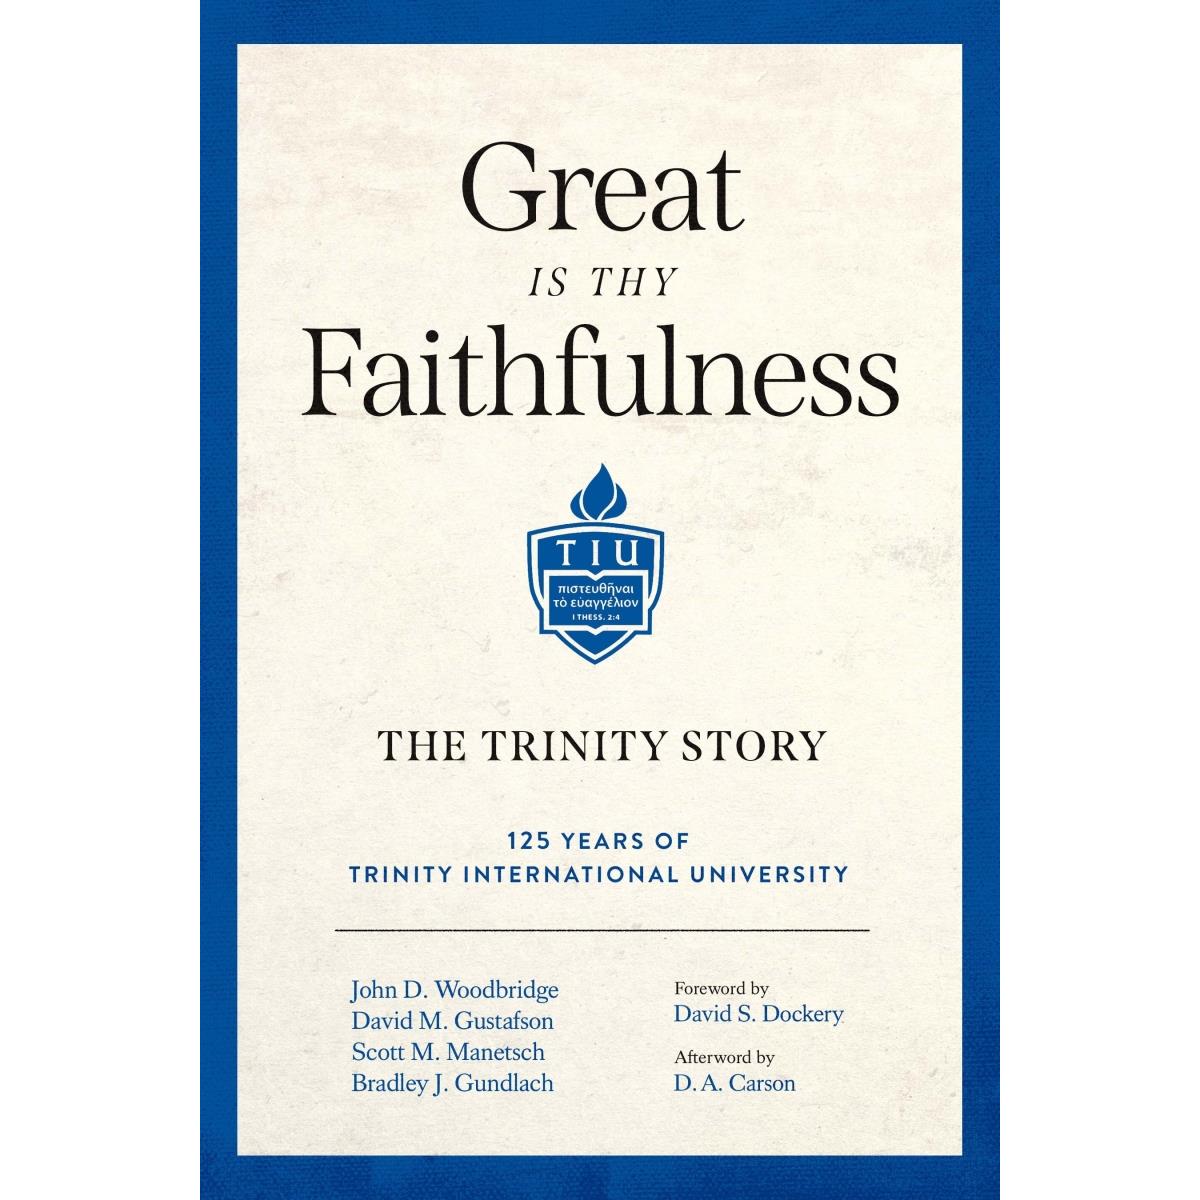 ISBN 9781683596325 product image for Lexham Press 223543 Great is Thy Faithfulness Book | upcitemdb.com